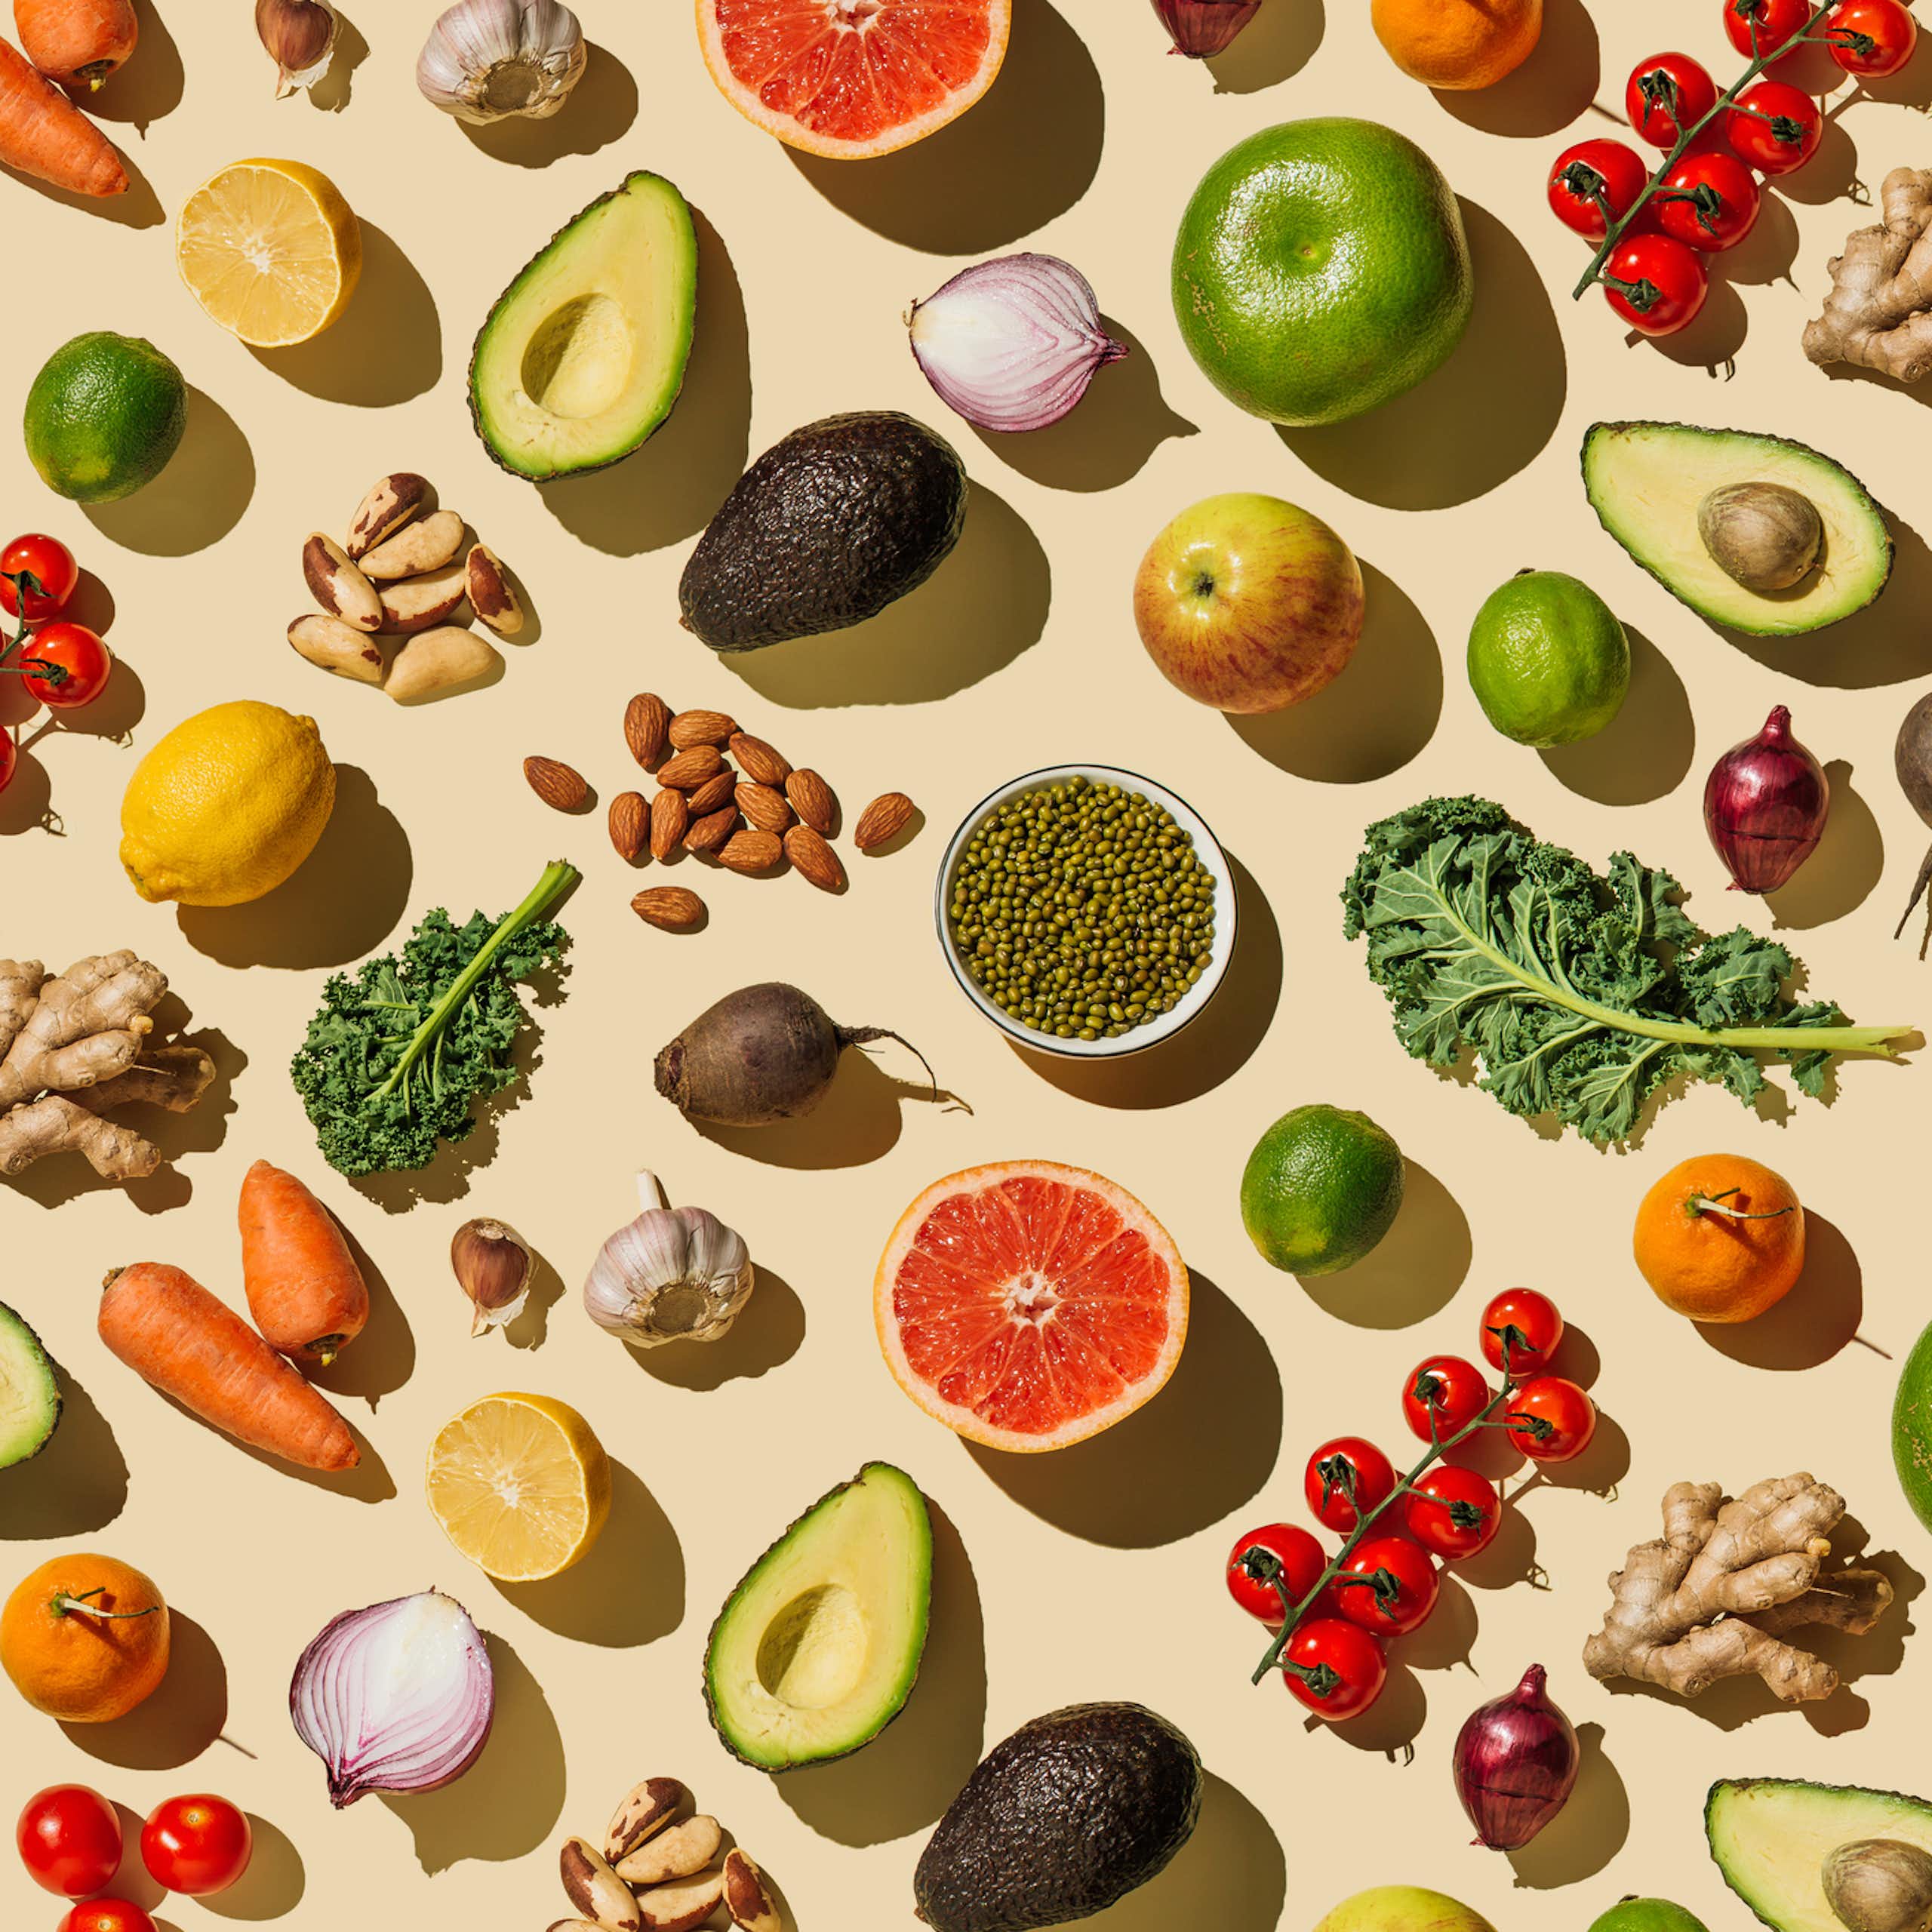 Fruits and vegetables arrayed against a beige background